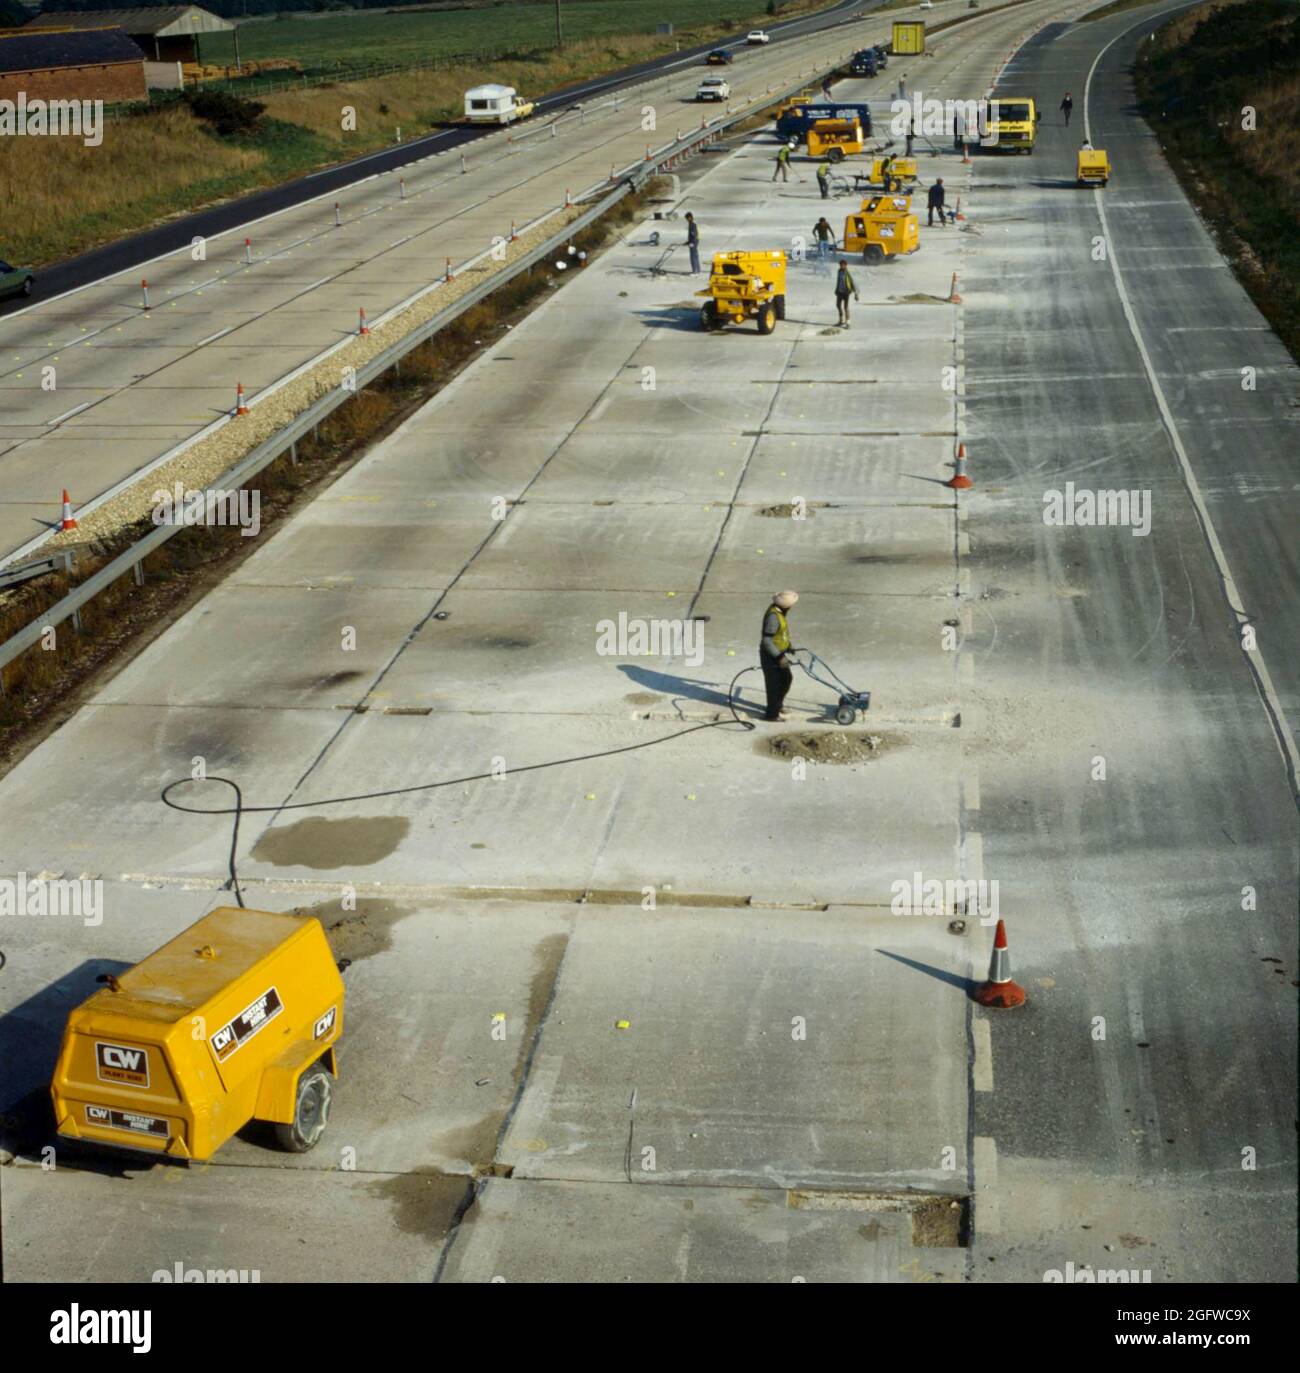 Repair work to the concrete surface of the M27 motorway westbound carriageway prior to junction 2, Hampshire, England, UK. Stock Photo